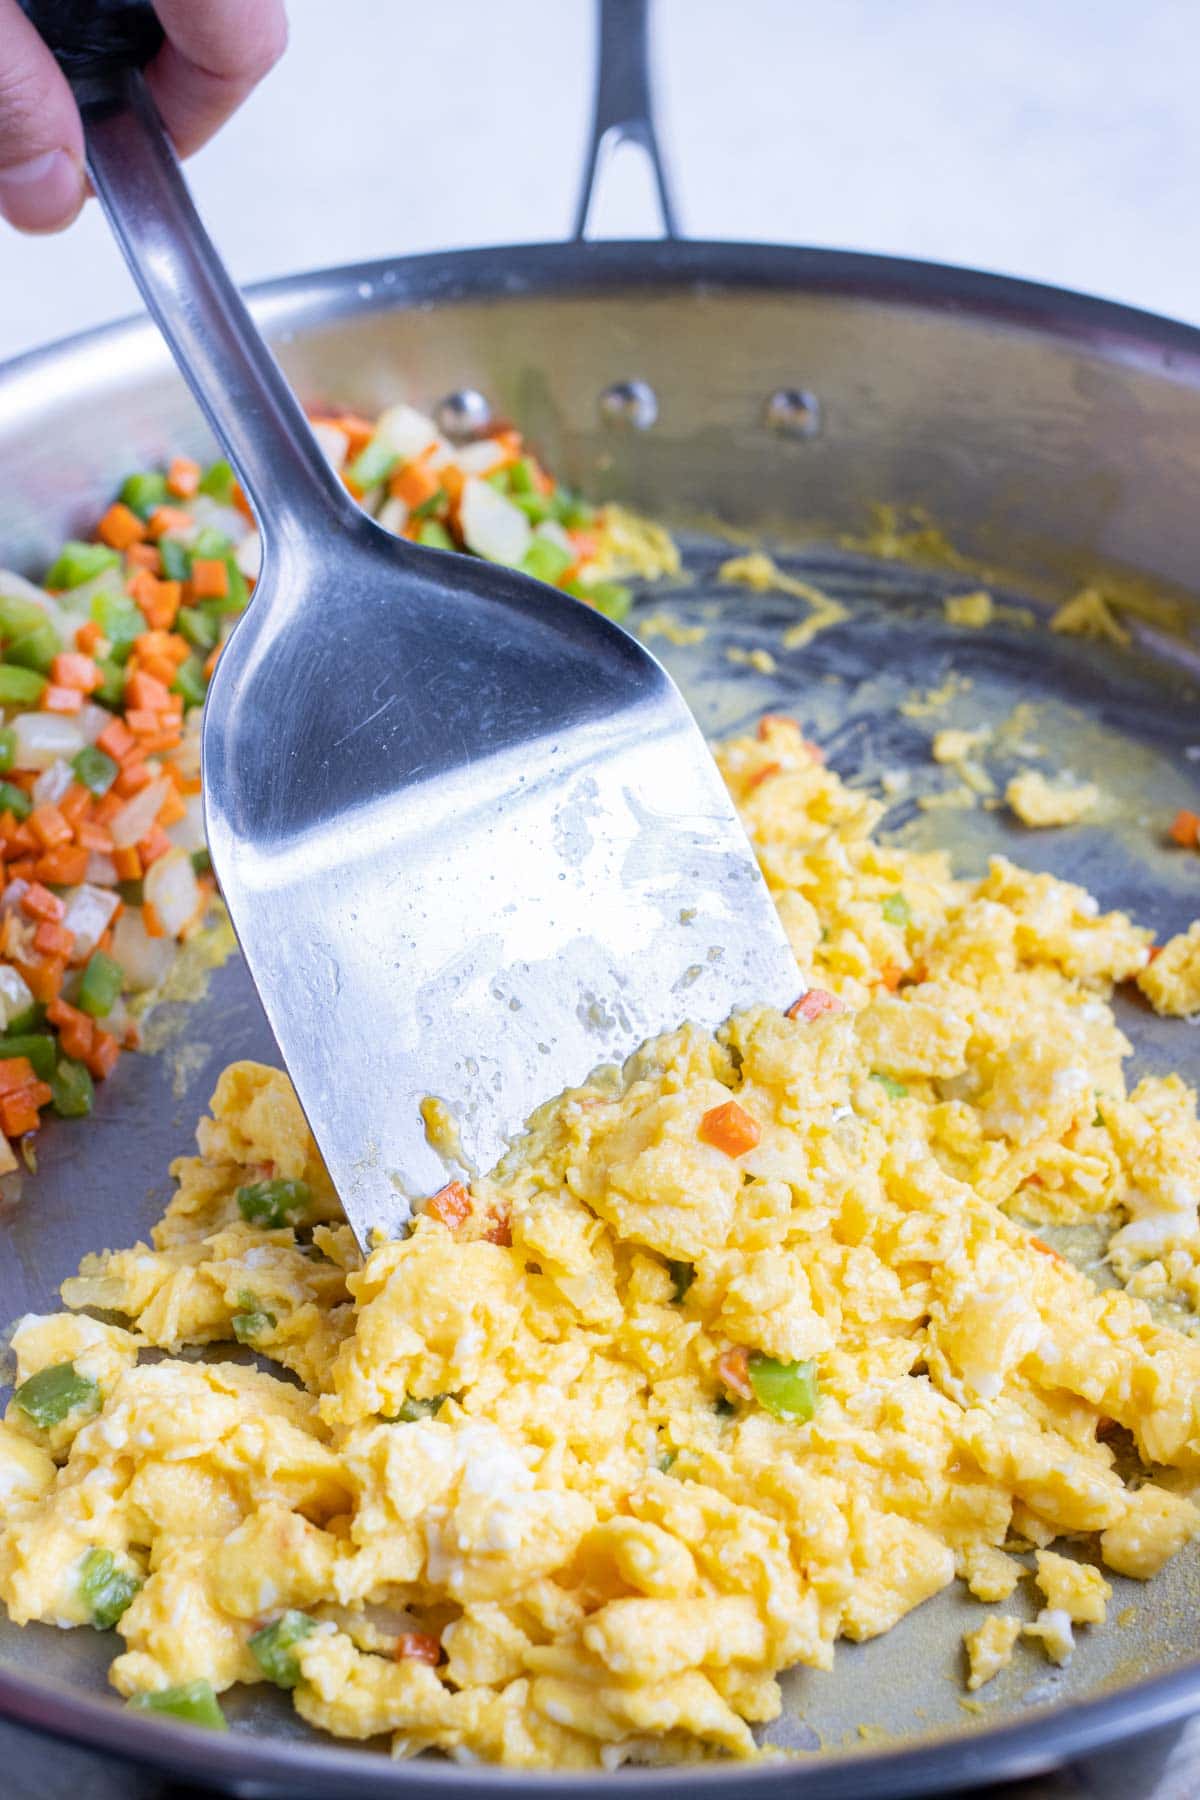 Eggs are added to the pan for cooking.